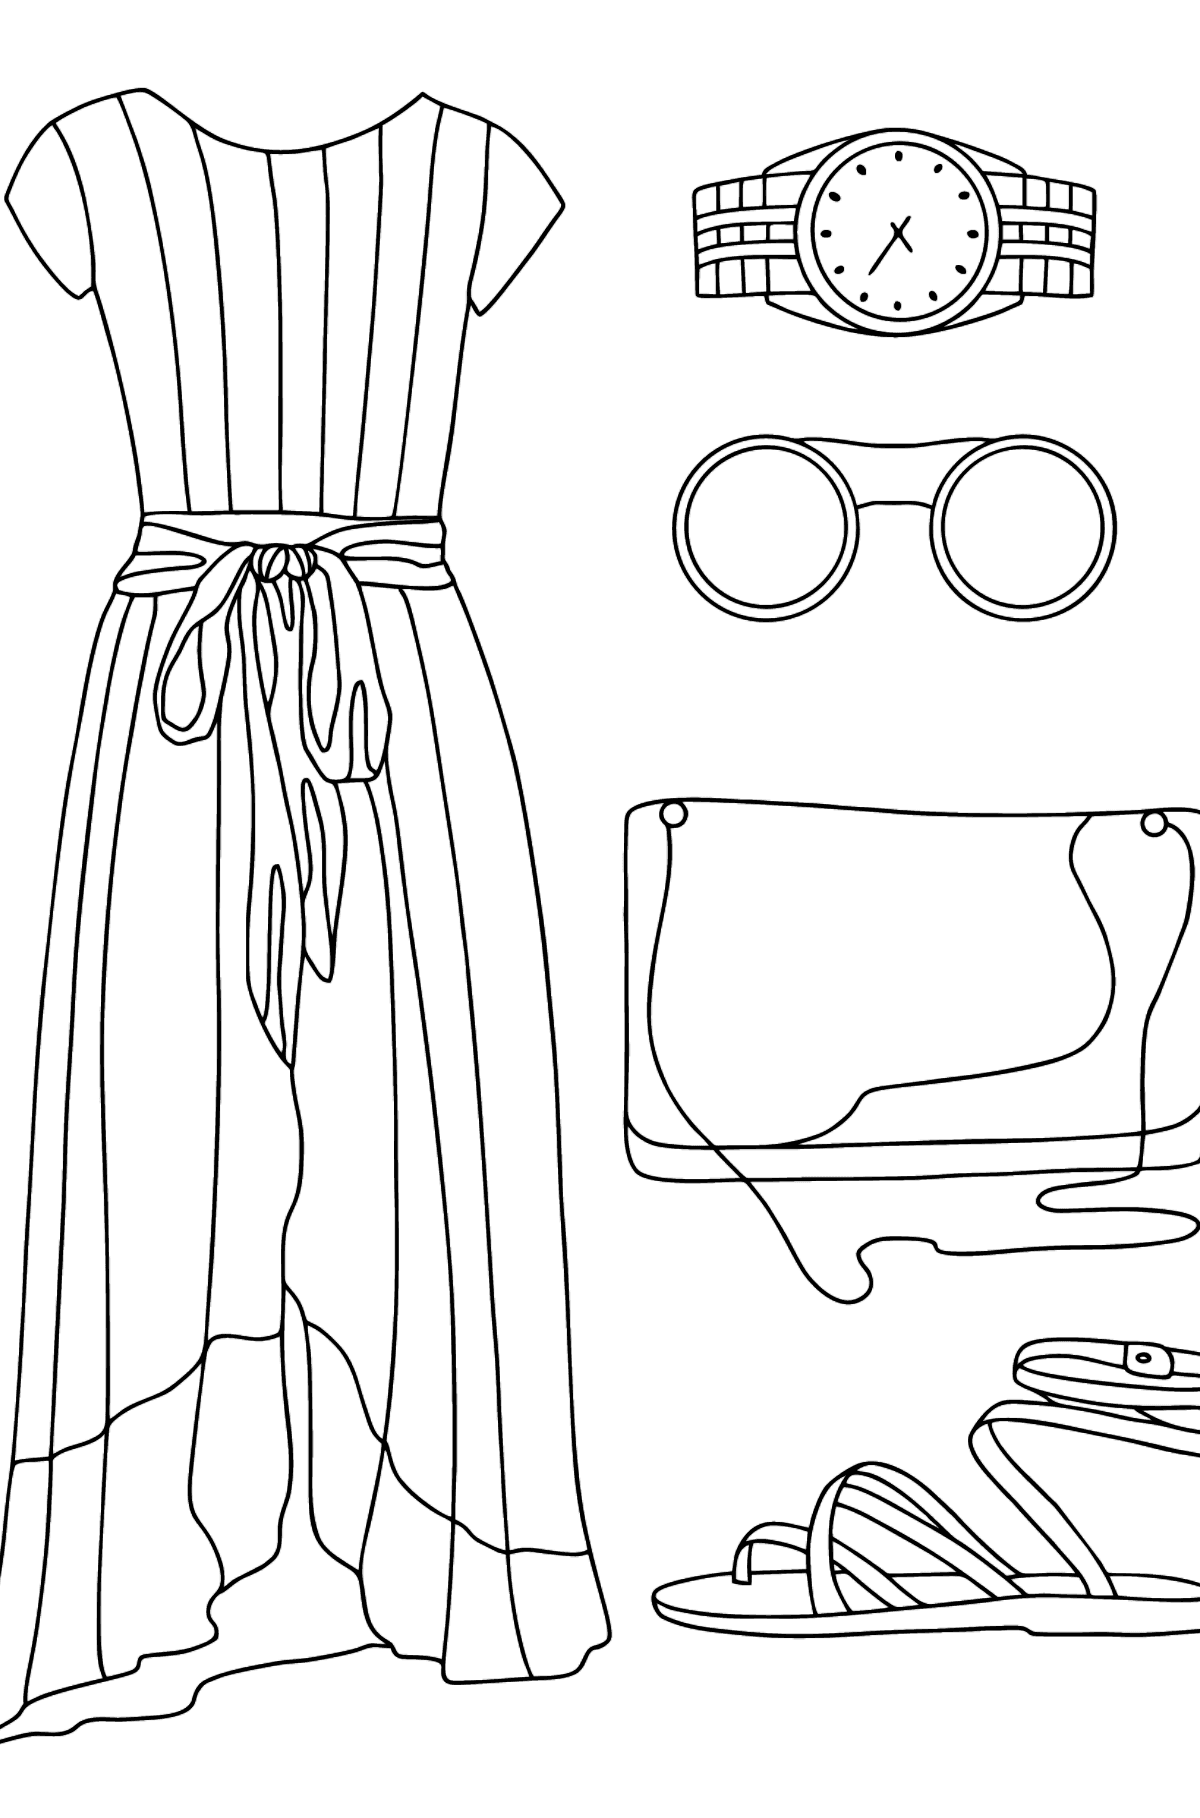 Summer Clothes Coloring Page